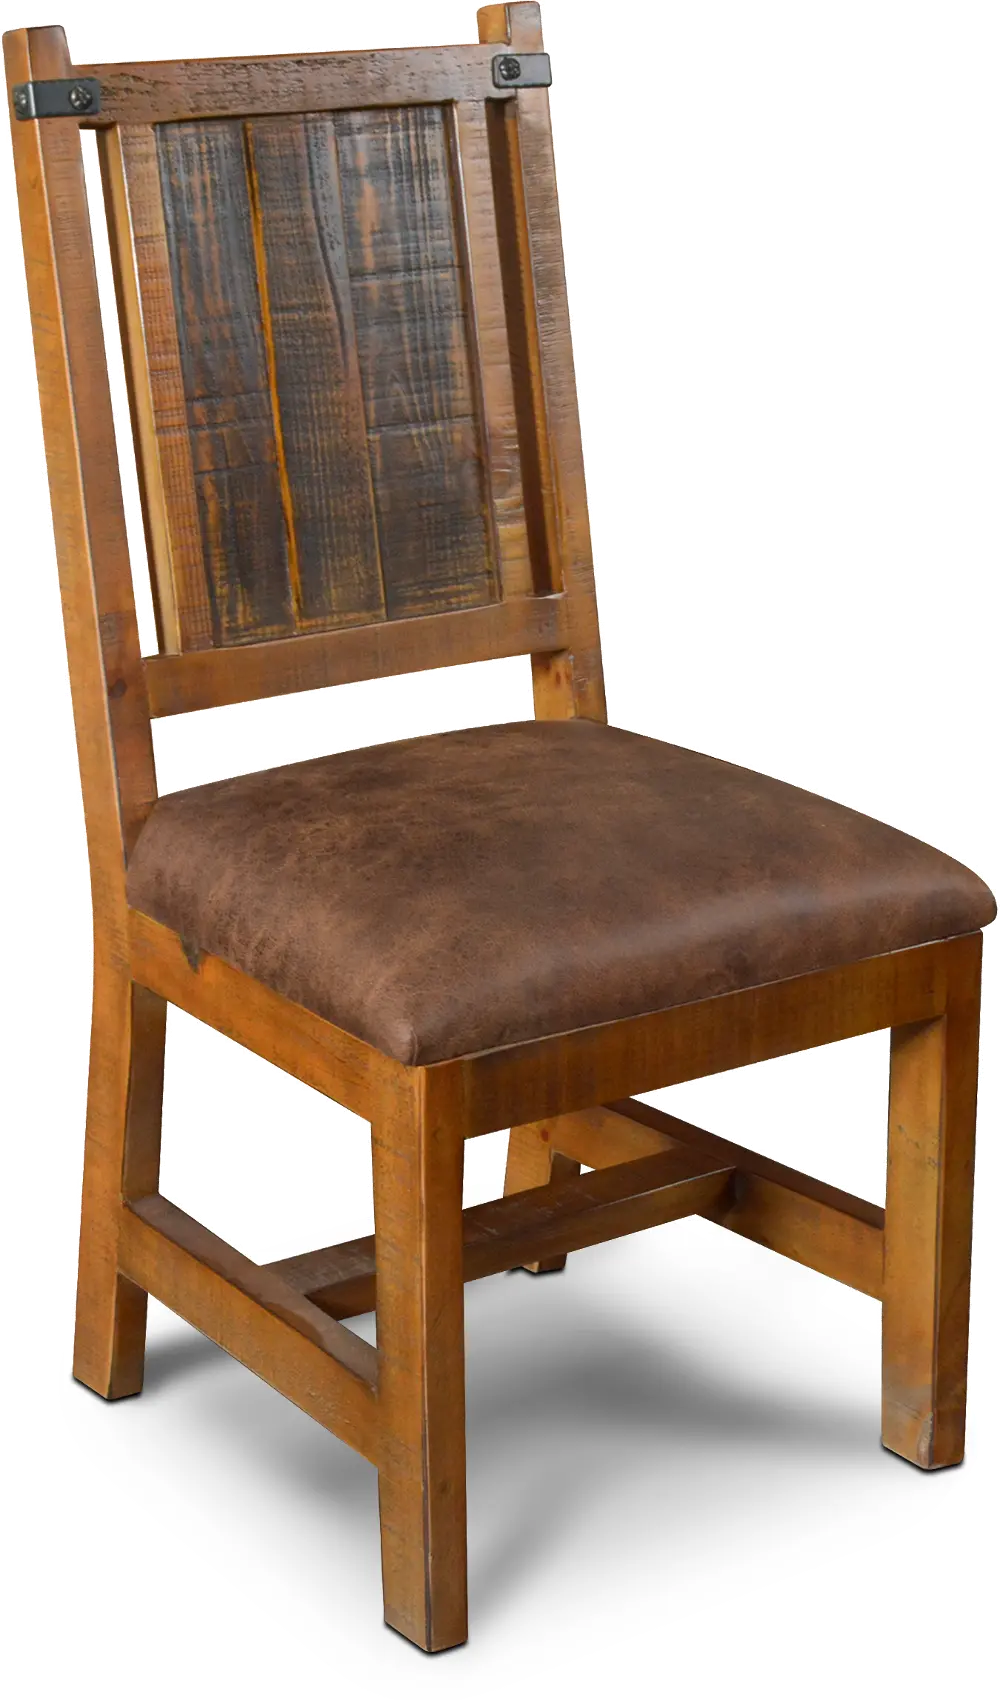 Rustic Pine Dining Room Chair - Big Timber-1